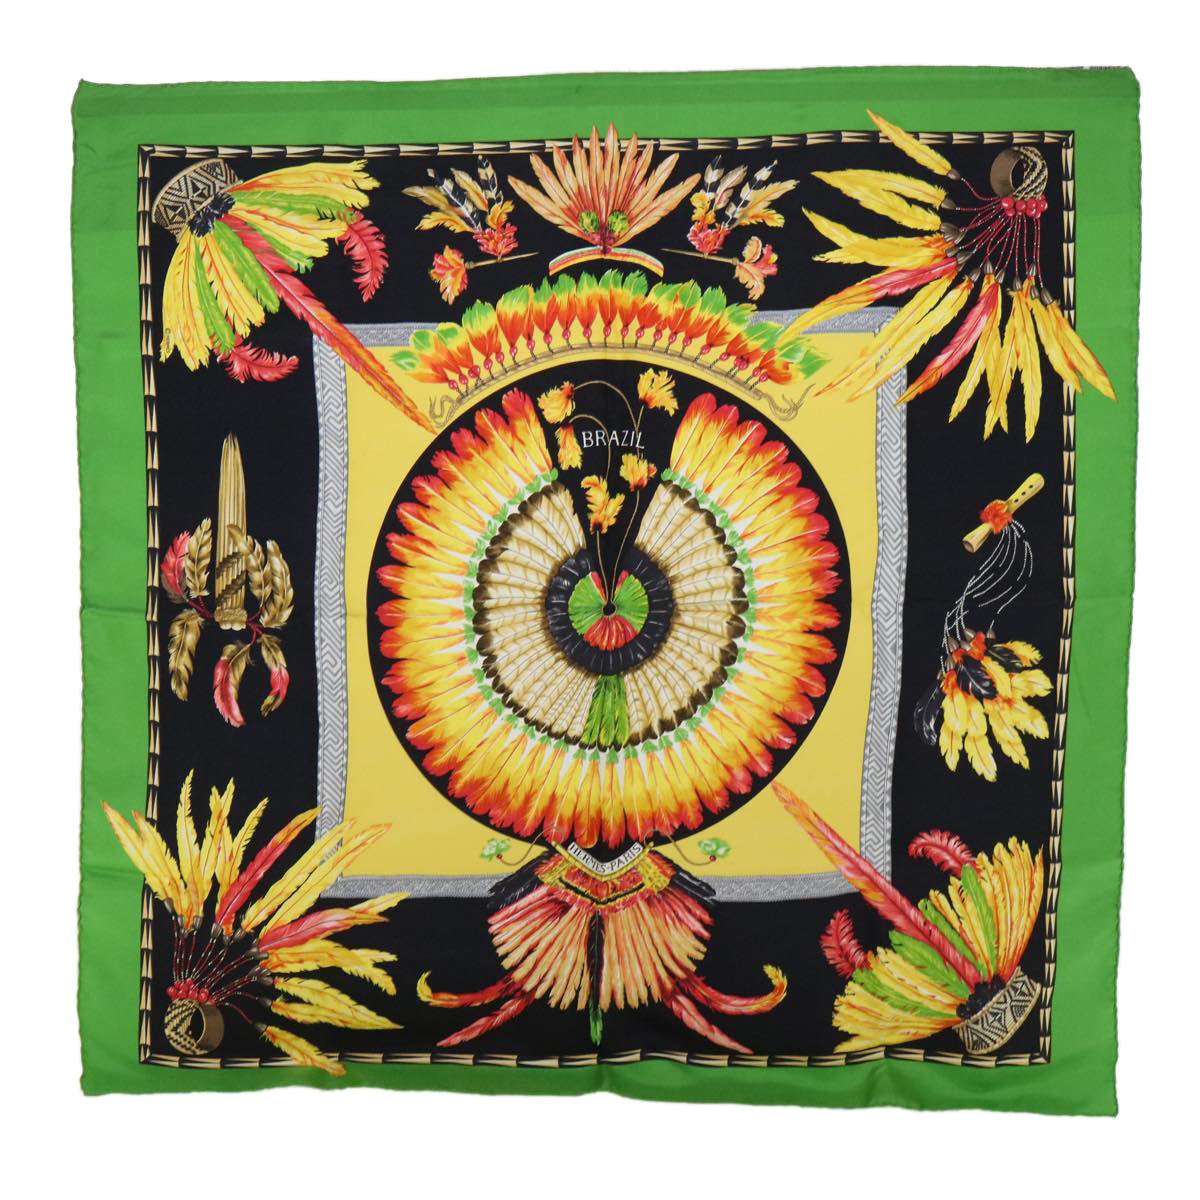 HERMES Carre 90 BRAZIL Scarf Silk Green Auth 52775